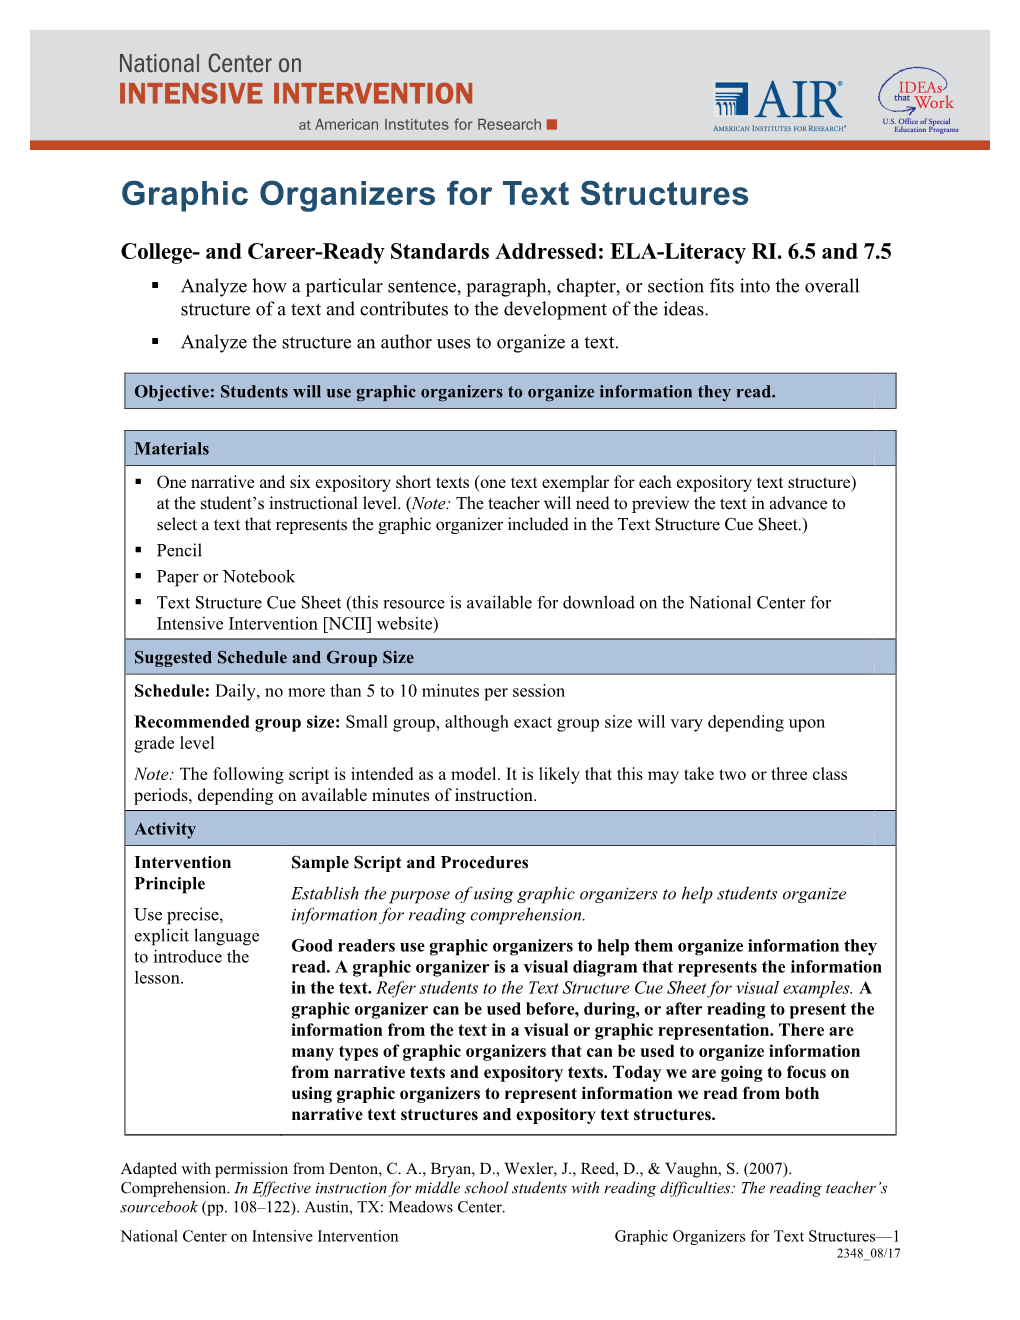 Graphic Organizers for Text Structures